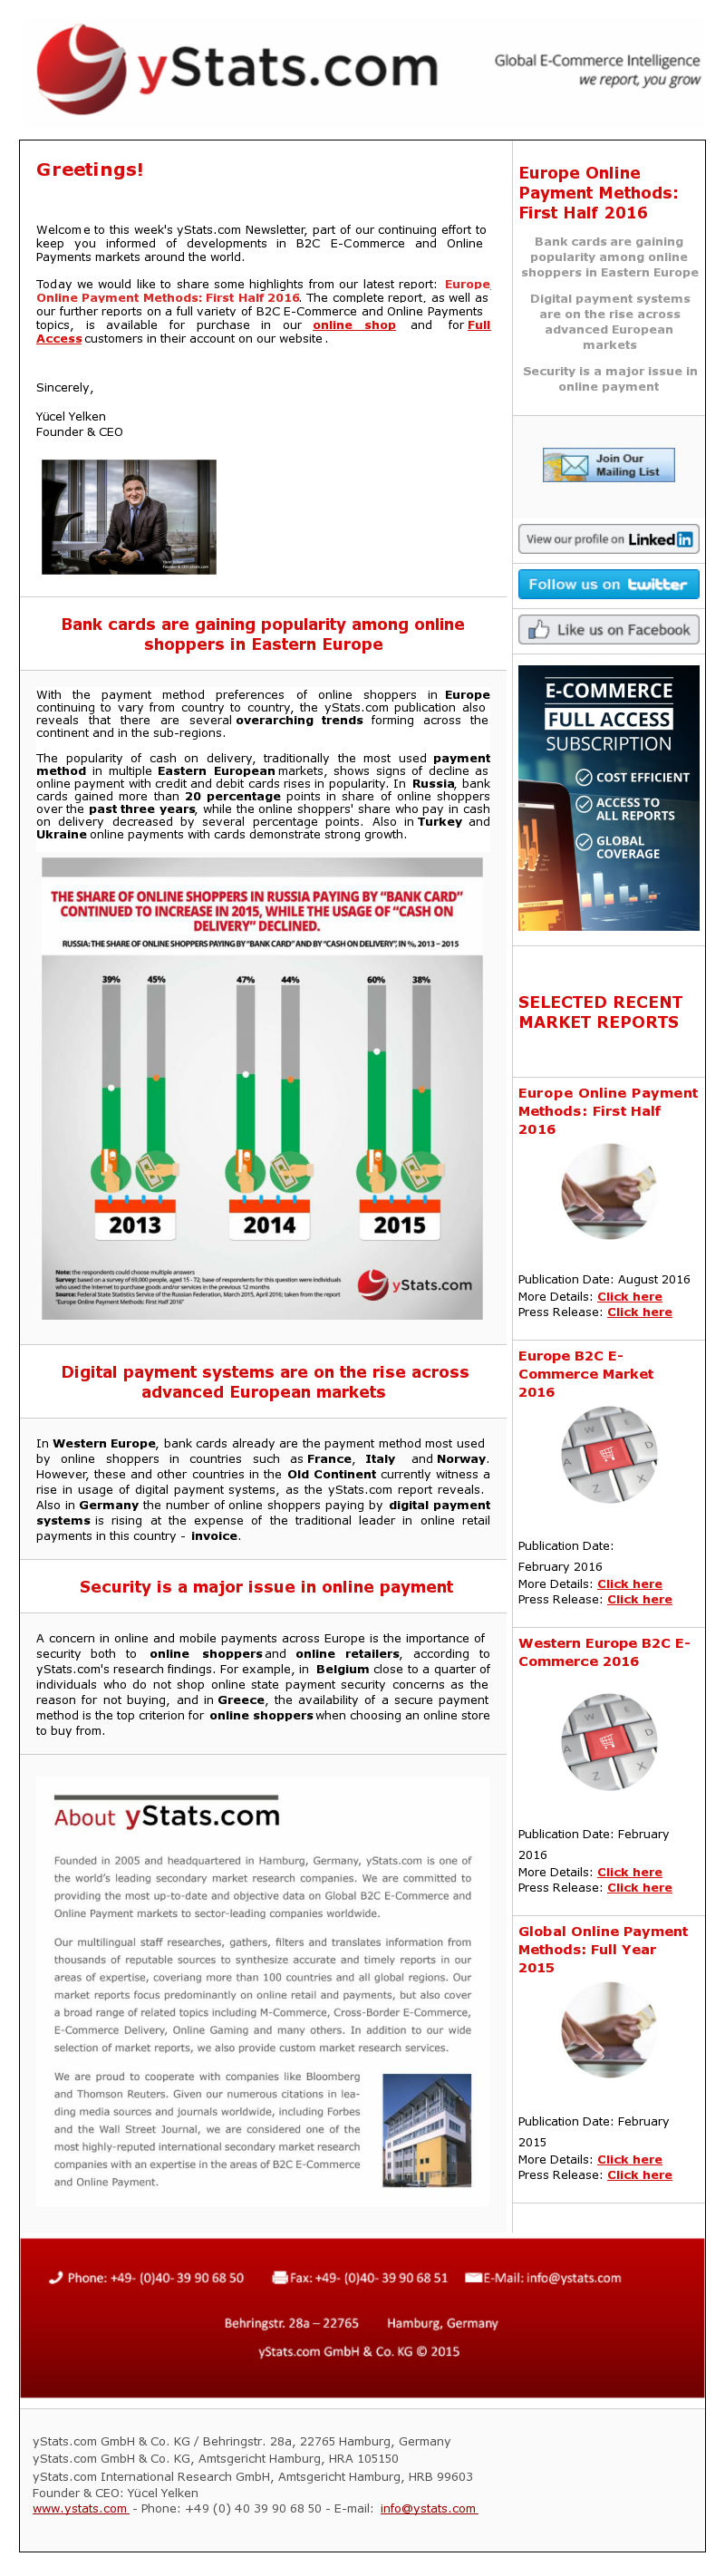 The changes in European online payment landscape

With the payment method preferences of online shoppers in Europe continuing to vary from country to country, the yStats.com publication also reveals that there are several overarching trends forming across the continent and in the sub-regions.

The popularity of cash on delivery, traditionally the most used payment method in multiple Eastern European markets, shows signs of decline as online payment with credit and debit cards rises in popularity. In Russia, bank cards gained more than 20 percentage points in share of online shoppers over the past three years, while the online shoppers’ share who pay in cash on delivery decreased by several percentage points. Also in Turkey and Ukraine online payments with cards demonstrate strong growth.

In Western Europe, bank cards already are the payment method most used by online shoppers in countries such as France, Italy and Norway. However, these and other countries in the Old Continent currently witness a rise in usage of digital payment systems, as the yStats.com report reveals. Also in Germany the number of online shoppers paying by digital payment systems is rising at the expense of the traditional leader in online retail payments in this country – invoice.

A concern in online and mobile payments across Europe is the importance of security both to online shoppers and online retailers, according to yStats.com’s research findings. For example, in Belgium close to a quarter of individuals who do not shop online state payment security concerns as the reason for not buying, and in Greece, the availability of a secure payment method is the top criterion for online shoppers when choosing an online store to buy from.